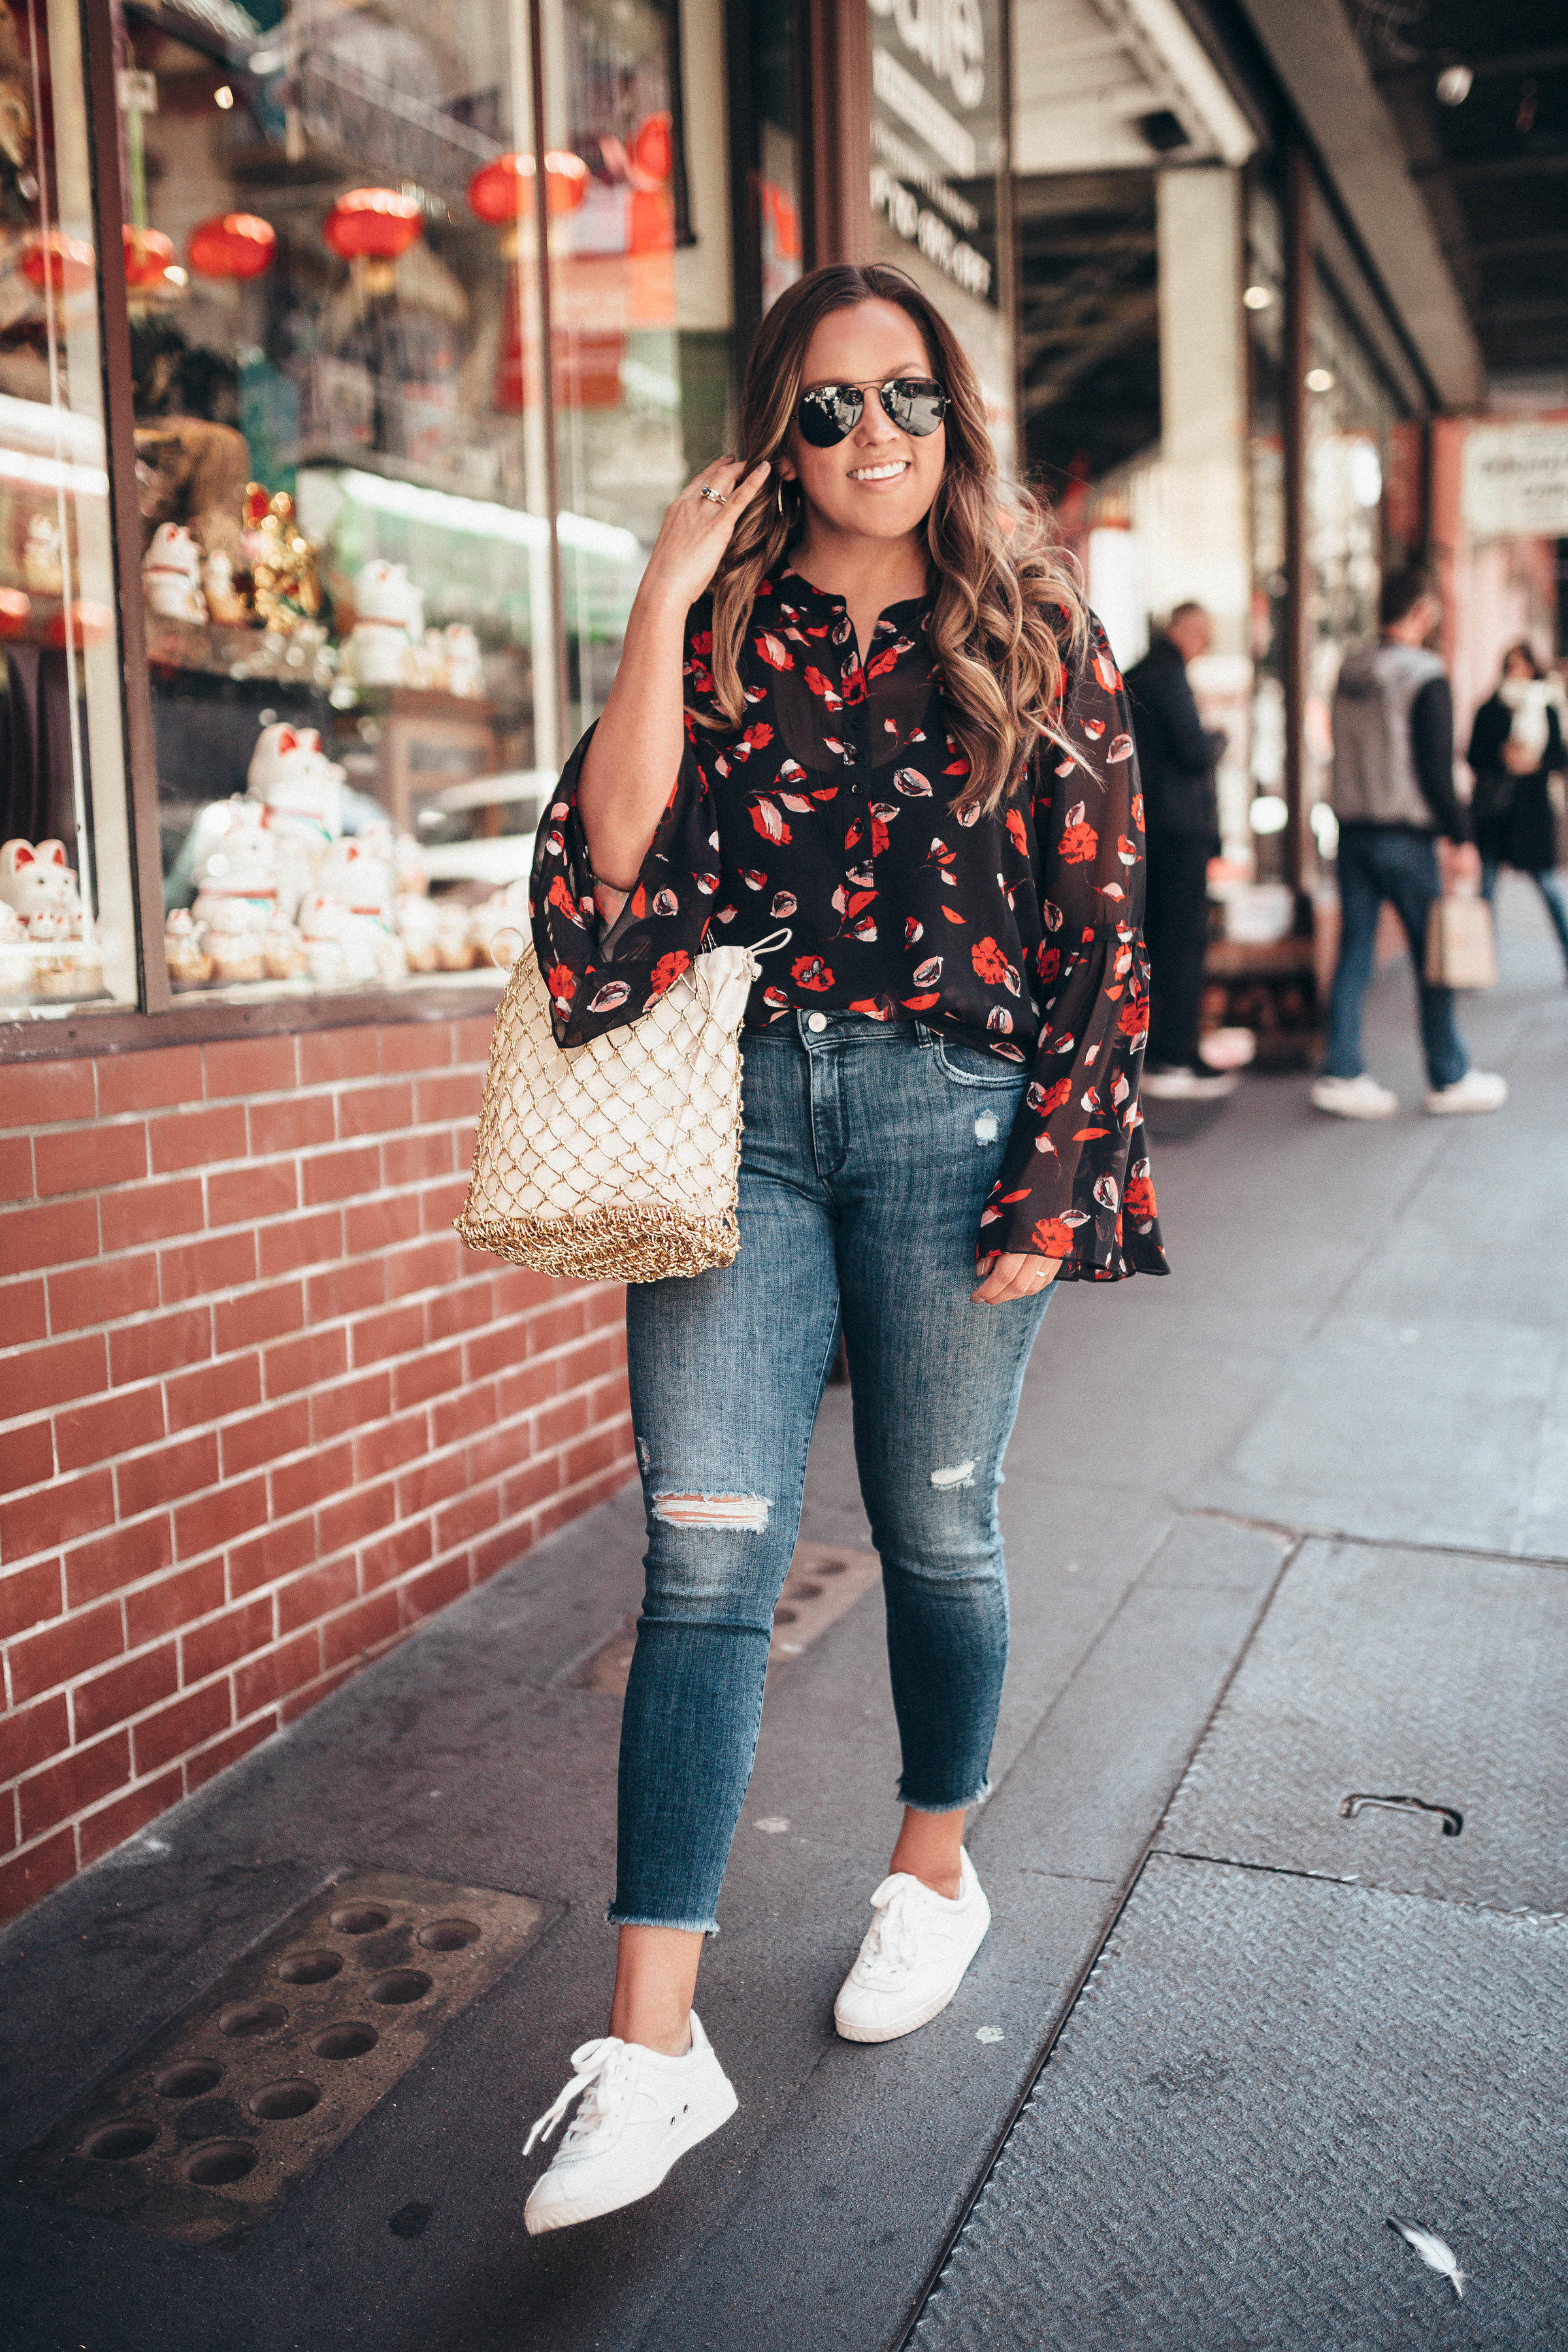 Ashley Zeal from Two Peas in a Prada shares her top picks for the last call of the Shopbop Sale. Get 25% off sitewide. Her jeans and sneakers on sale!